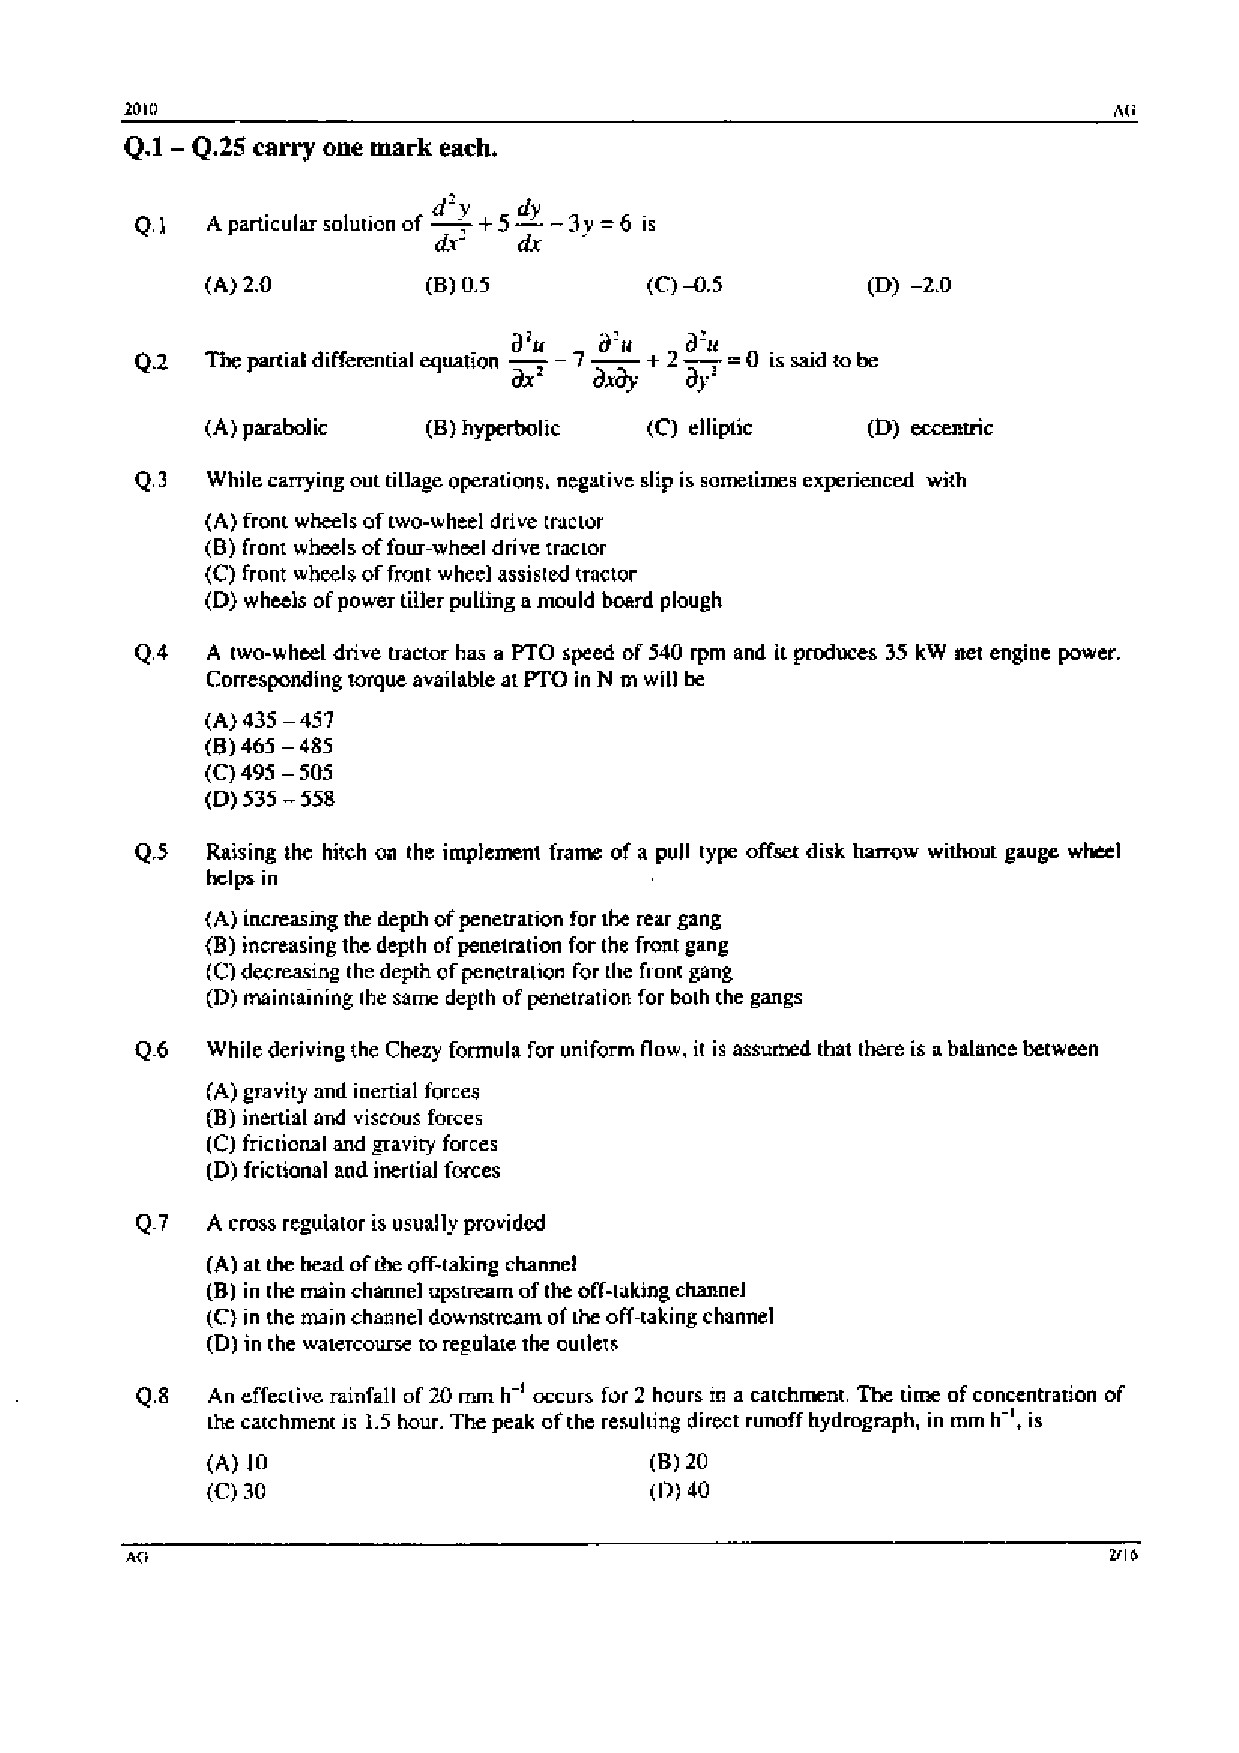 GATE Exam Question Paper 2010 Agricultural Engineering 2